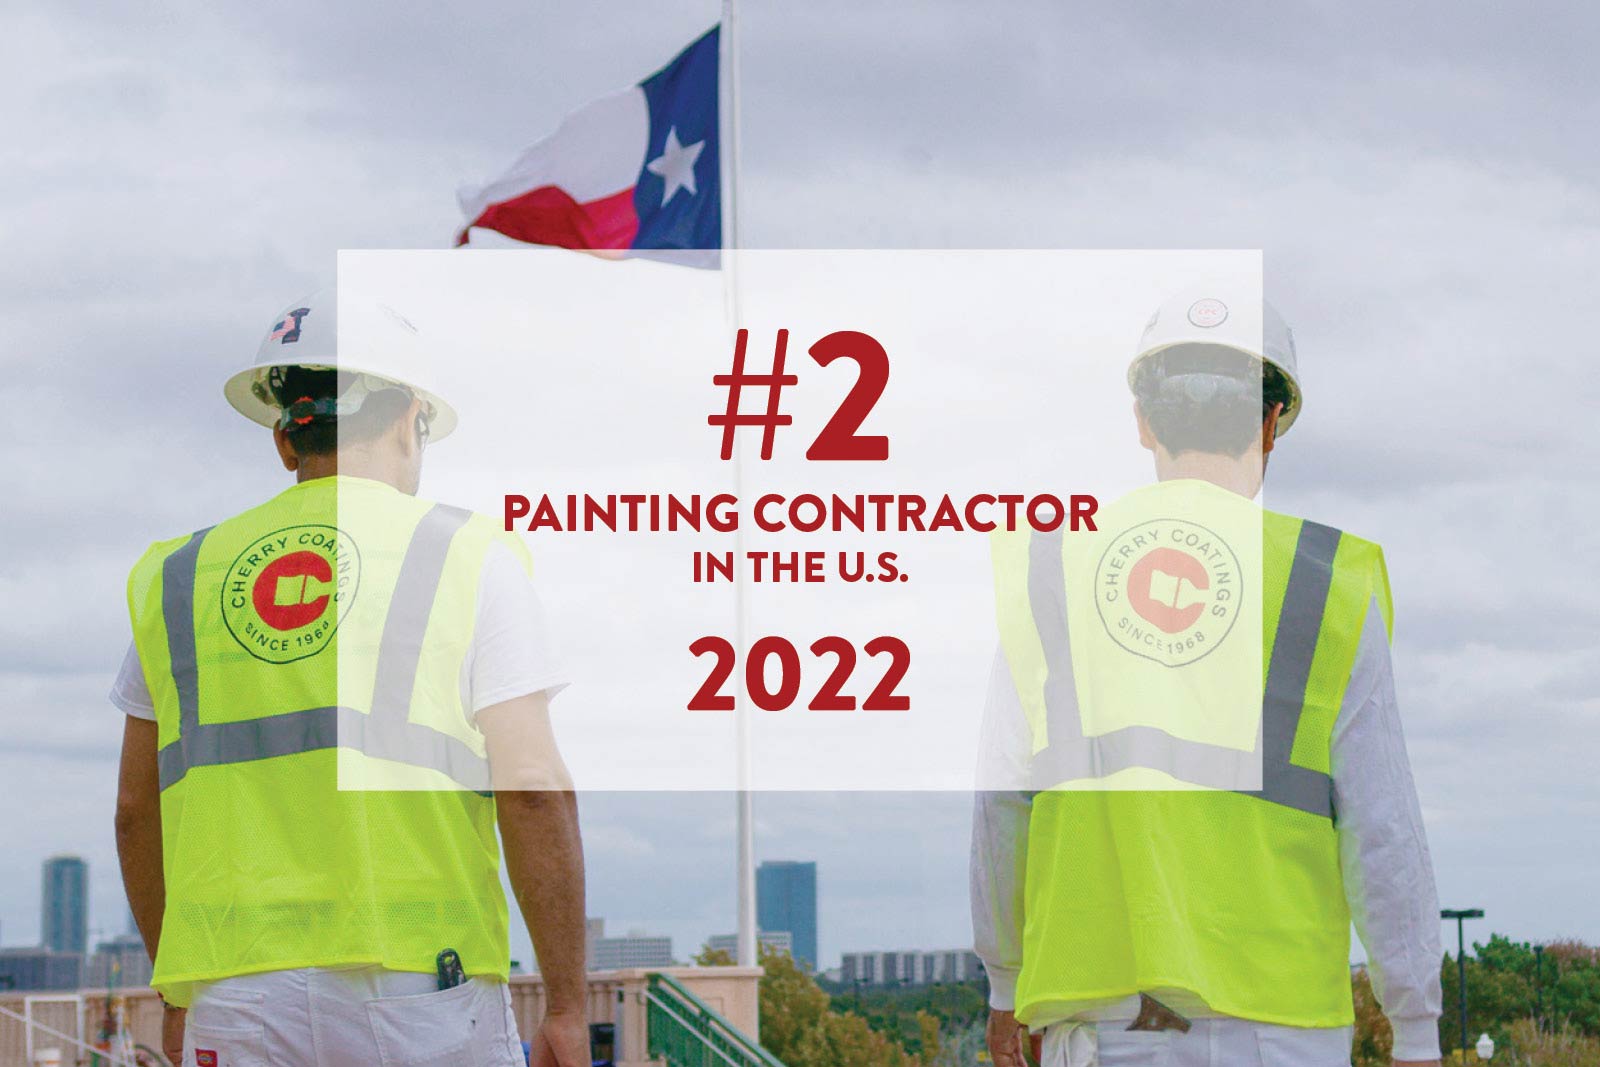 Cherry Coatings Named 2nd Largest Paint Contractor in the US